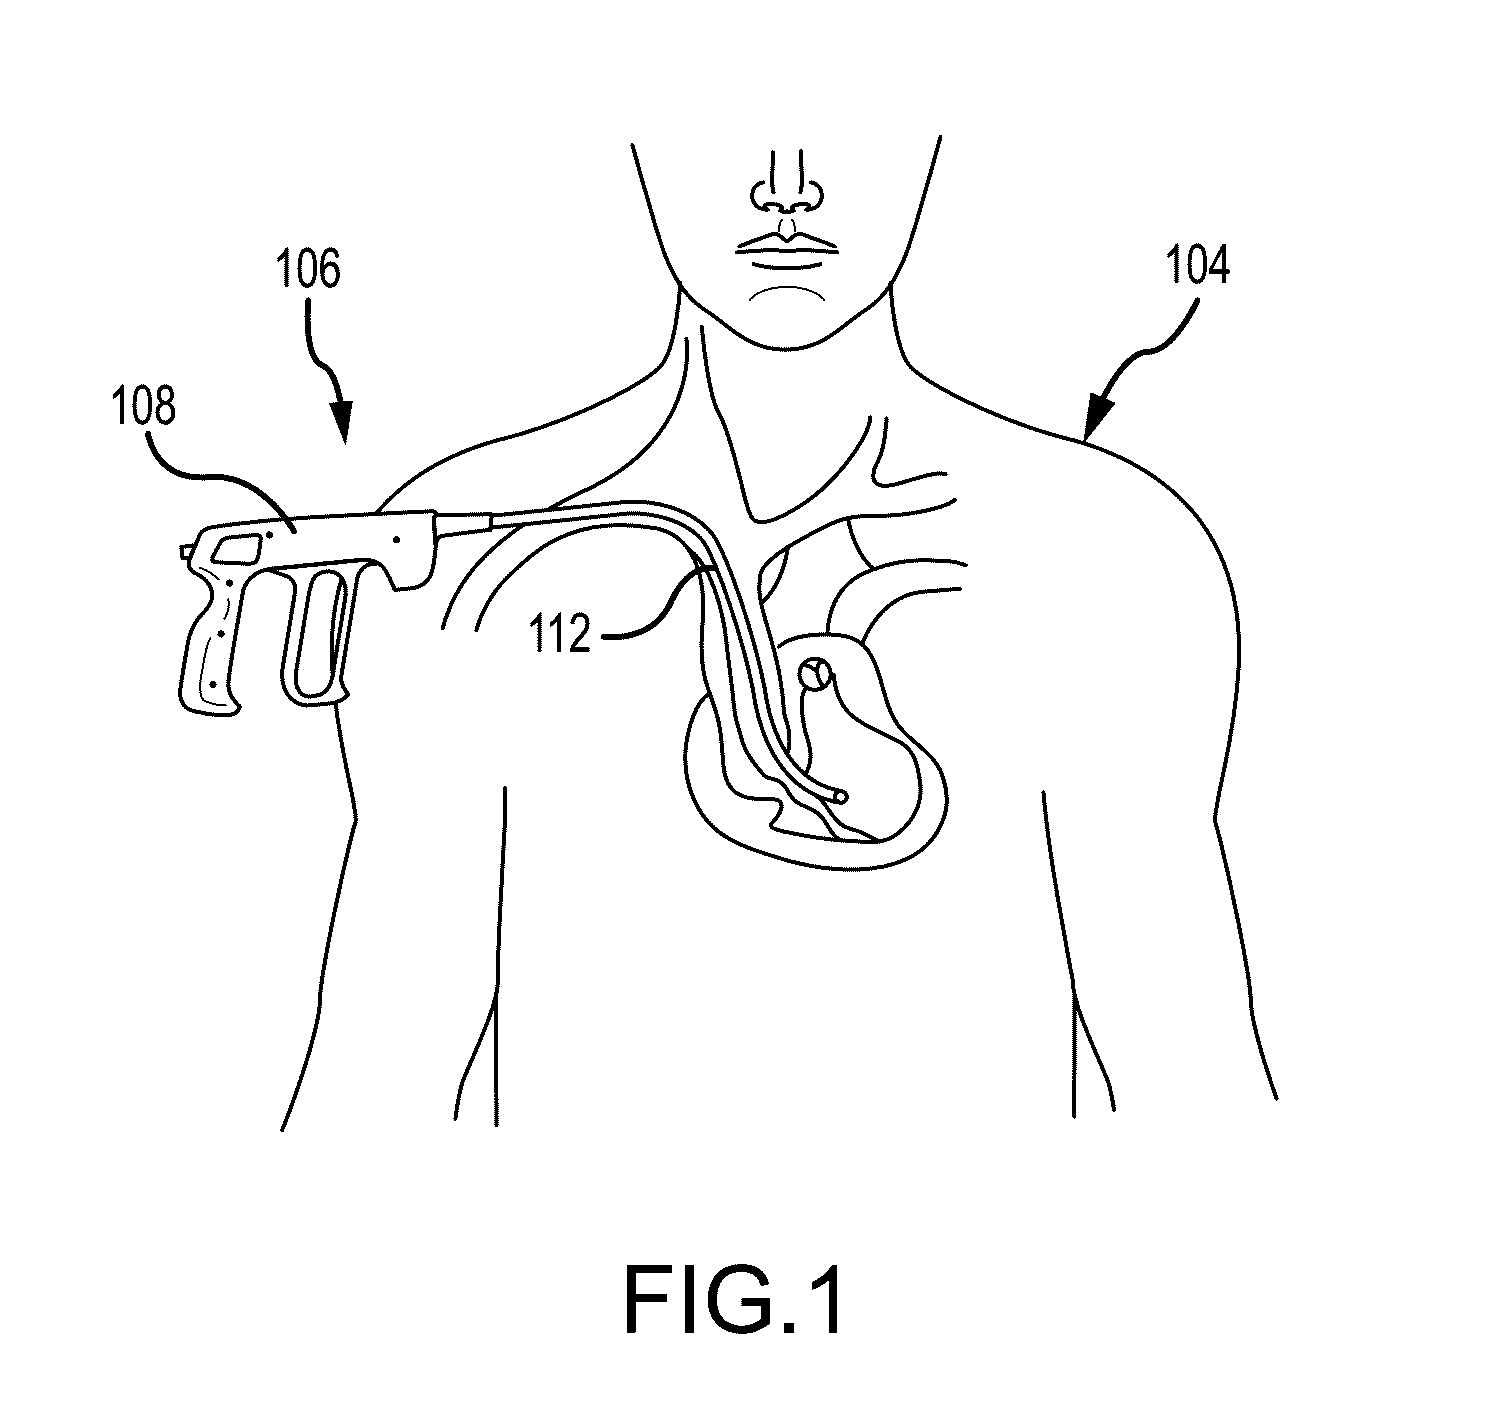 Medical device for removing an implanted object using laser cut hypotubes